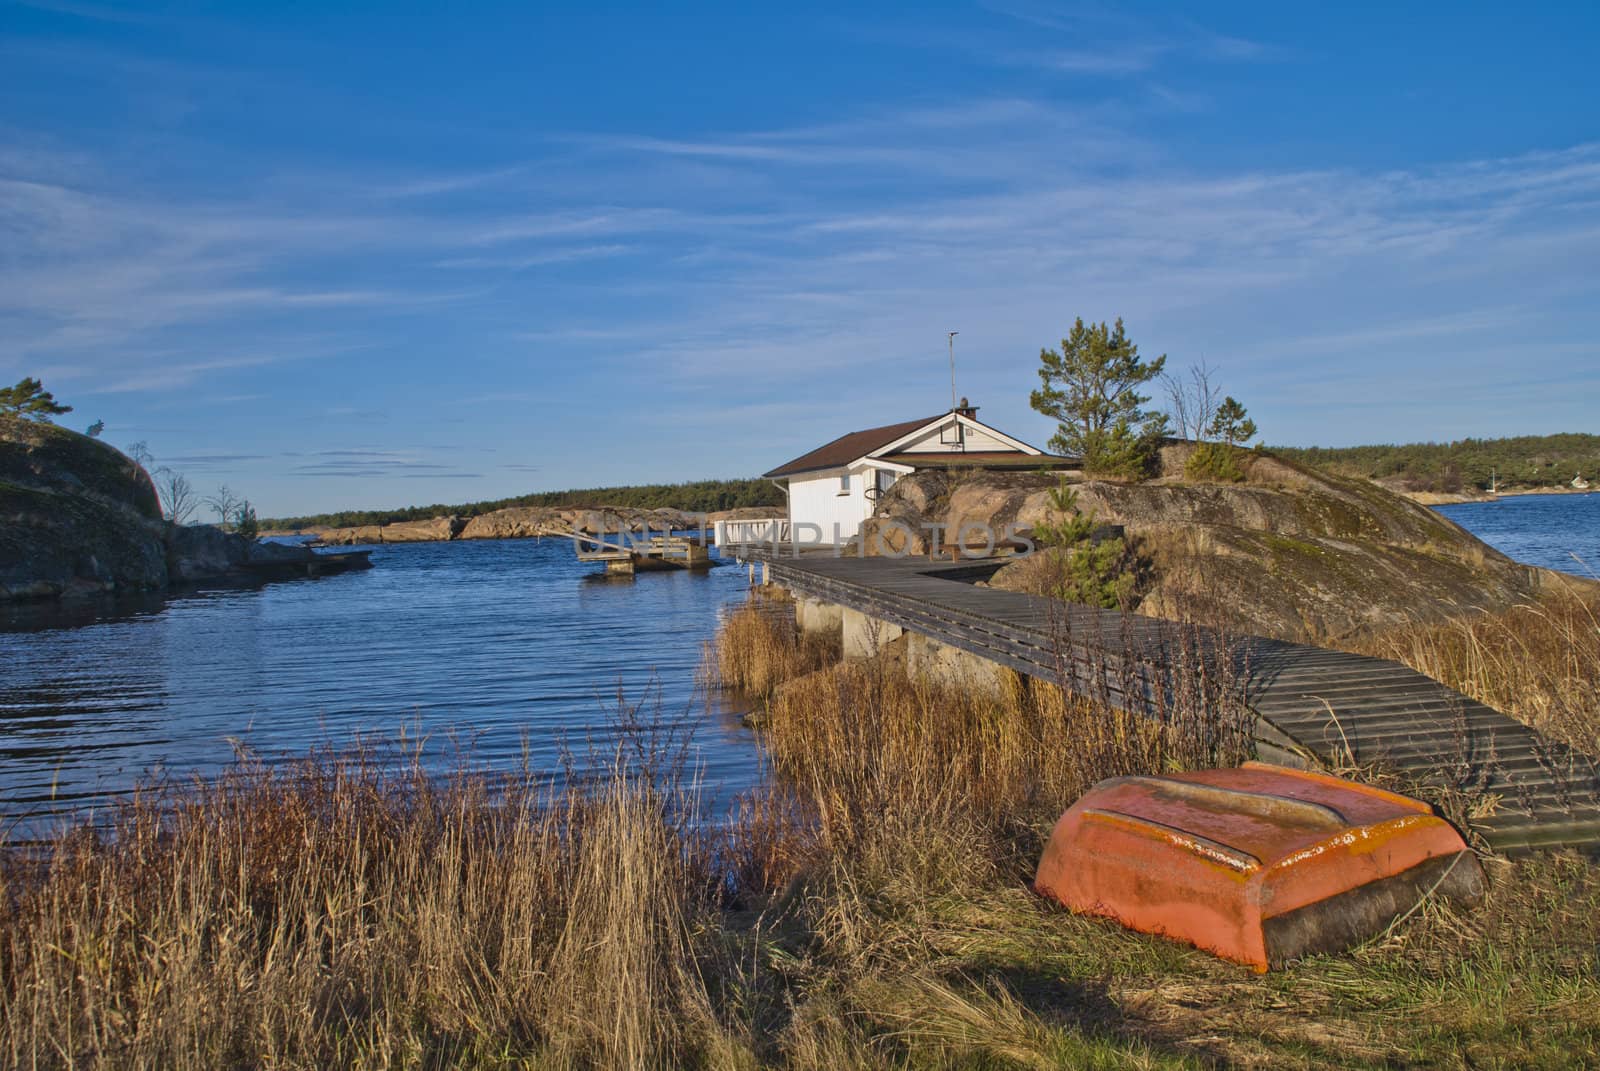 the cottage is built on a rock out at sea with its own pier promenade the cabin is beautifully situated near svalerødkilen in halden, image is shot in november 2012.